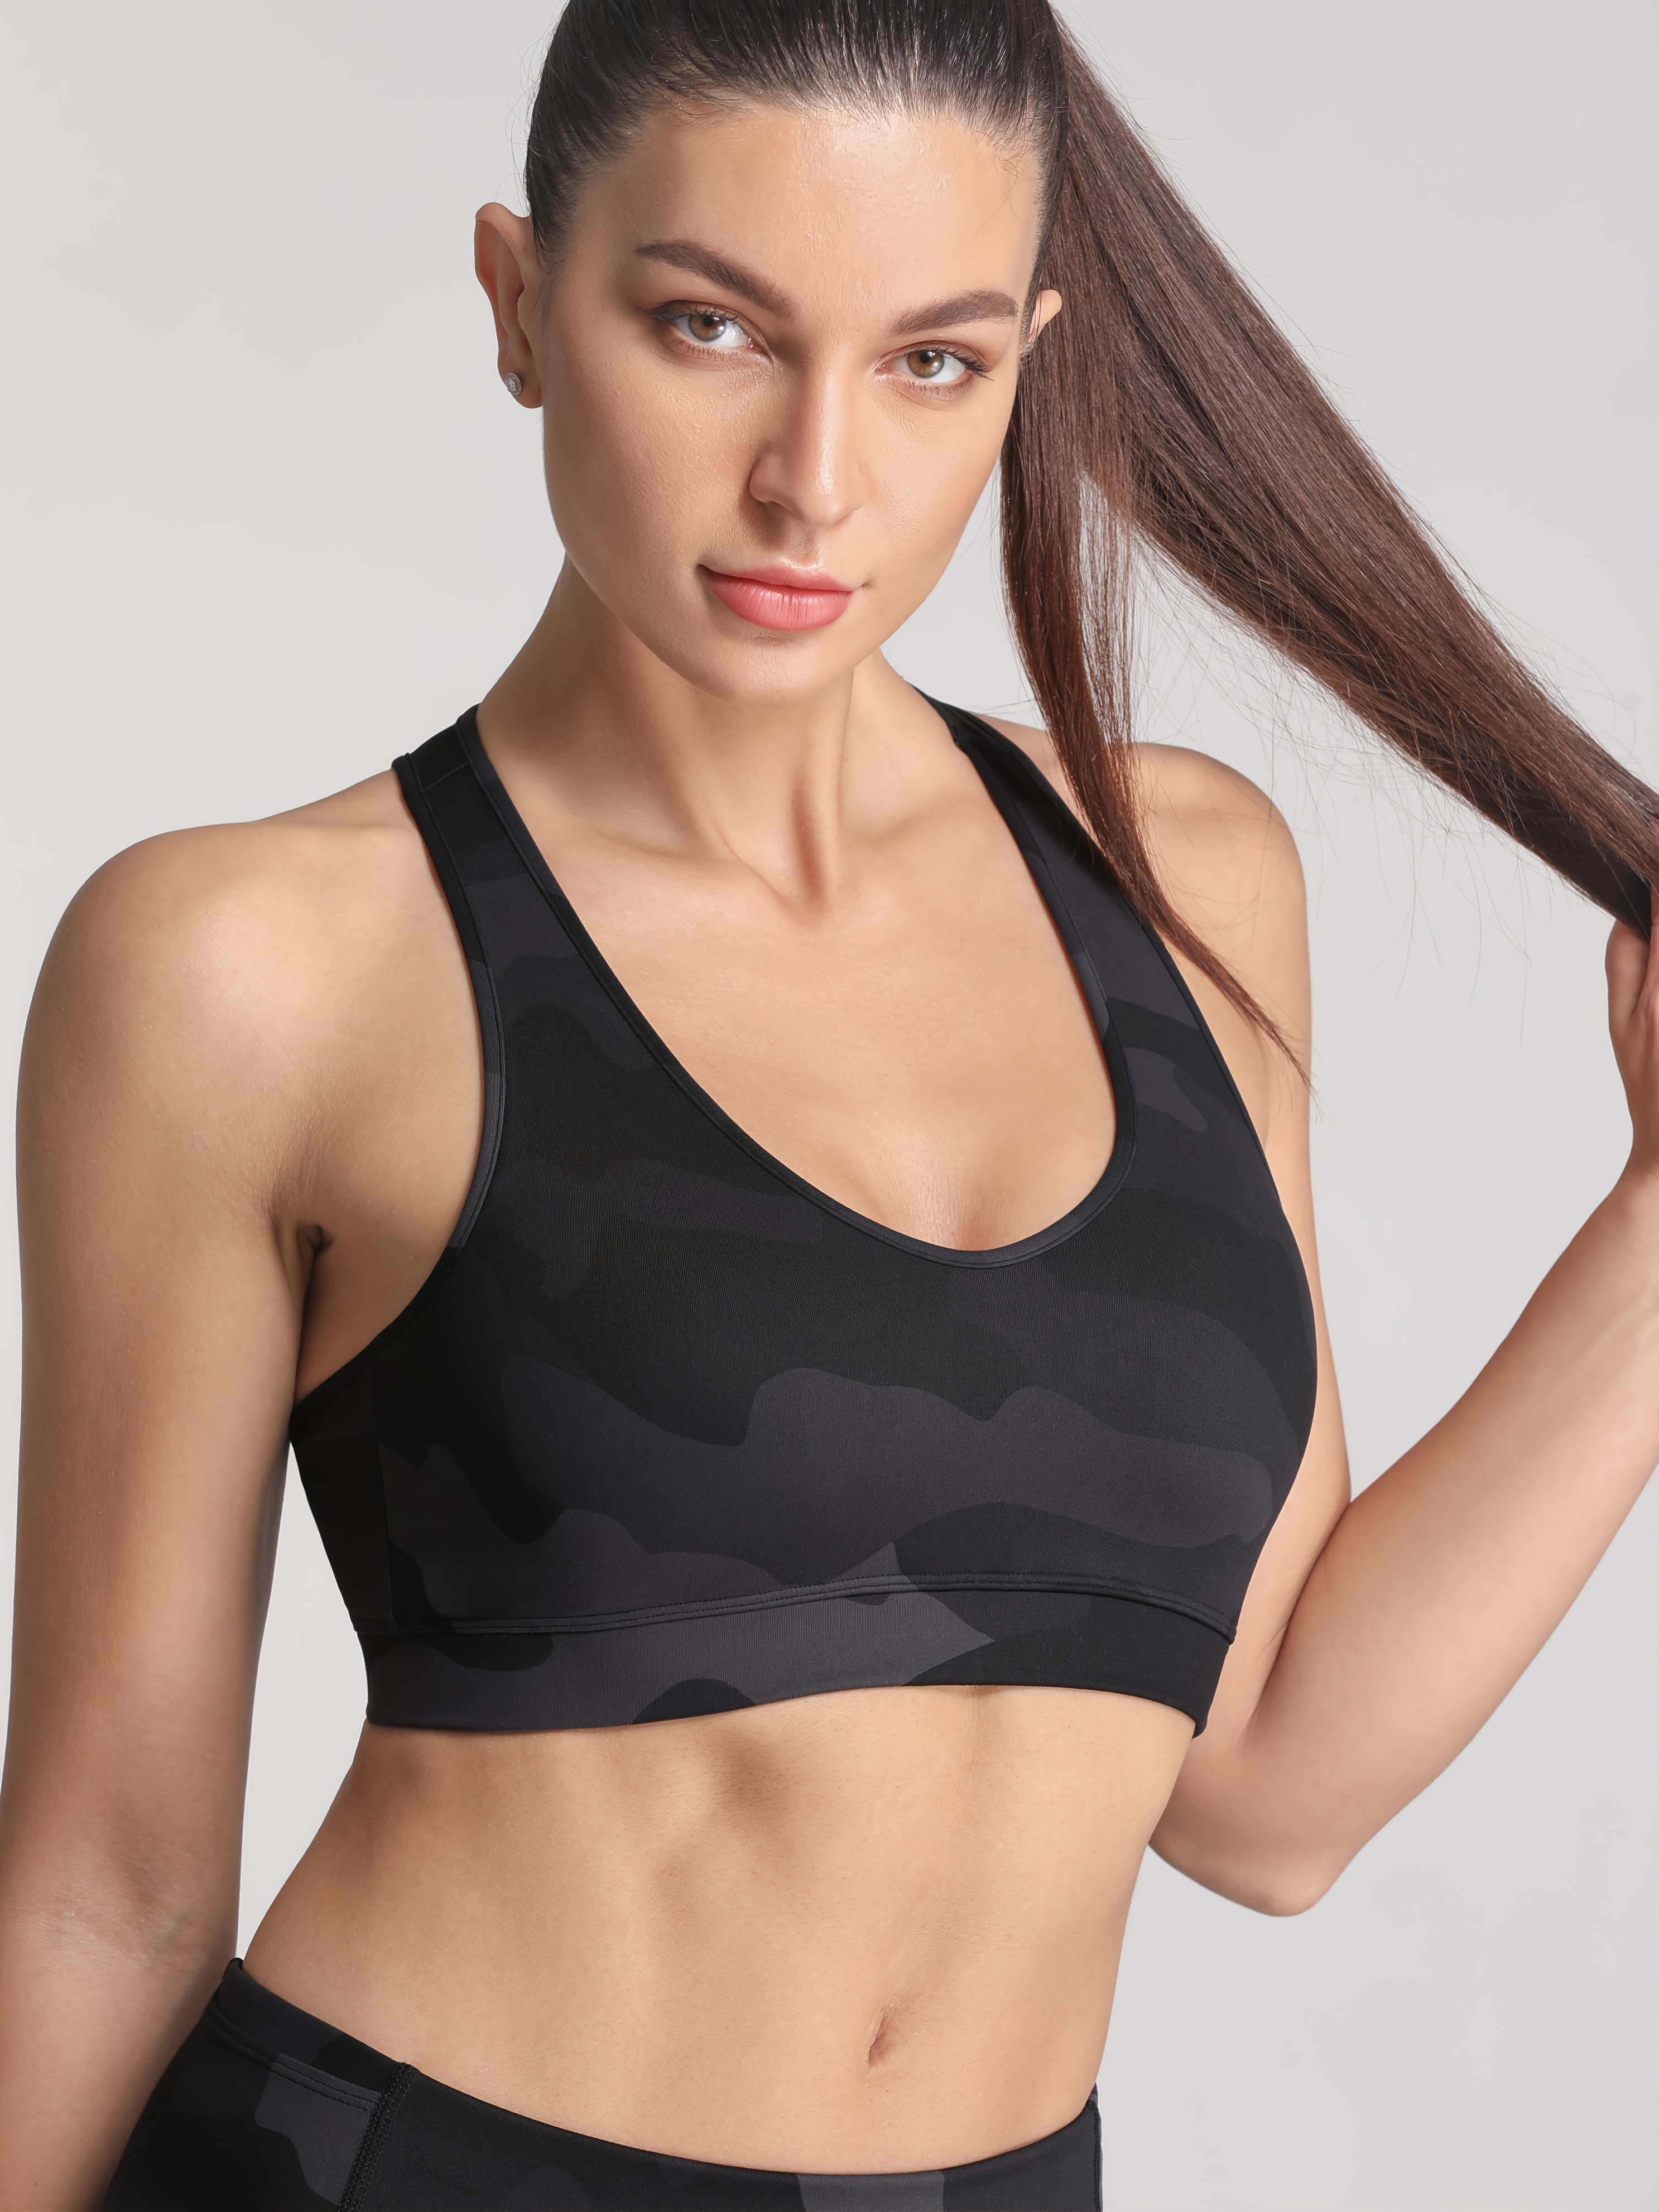 Sports Bras for Women Quick-Drying Breathable Lingerie Yoga